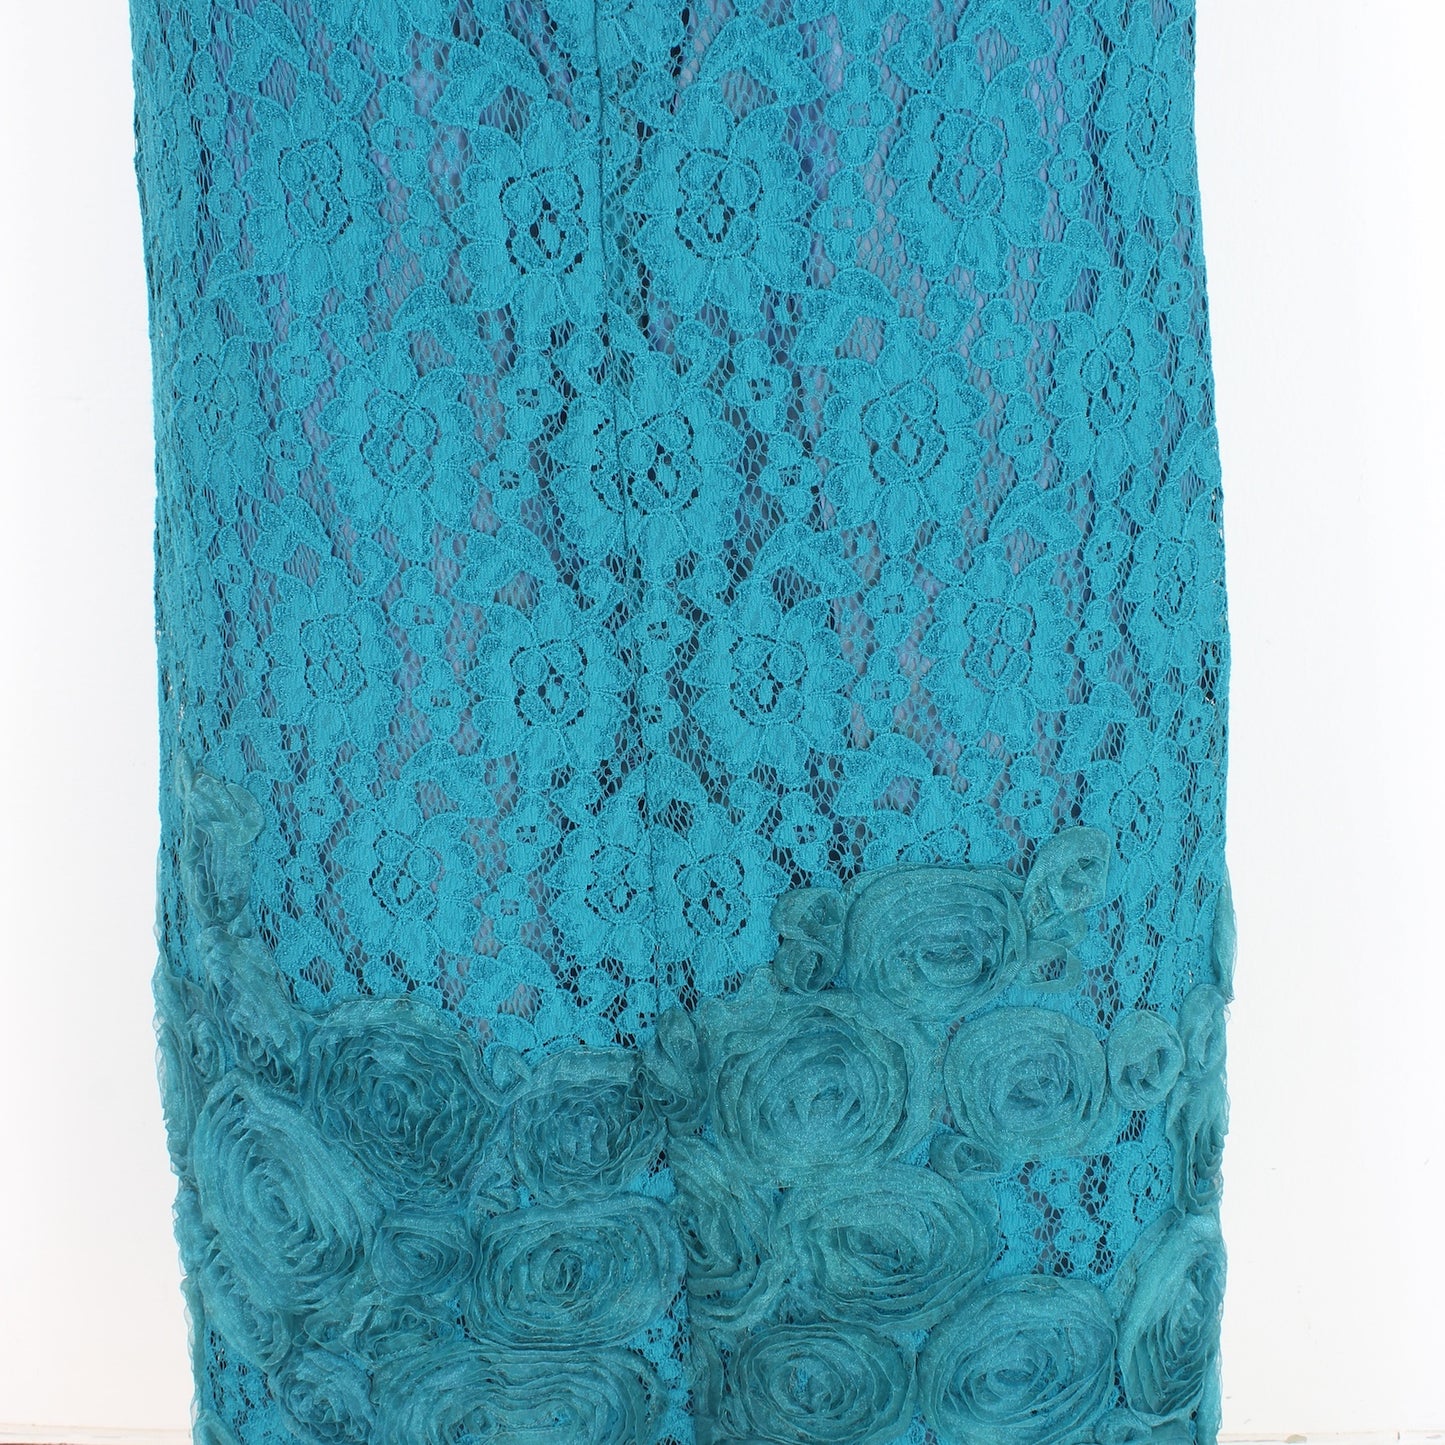 Romeo Gigli Green Lace Floral Evening Long Skirt